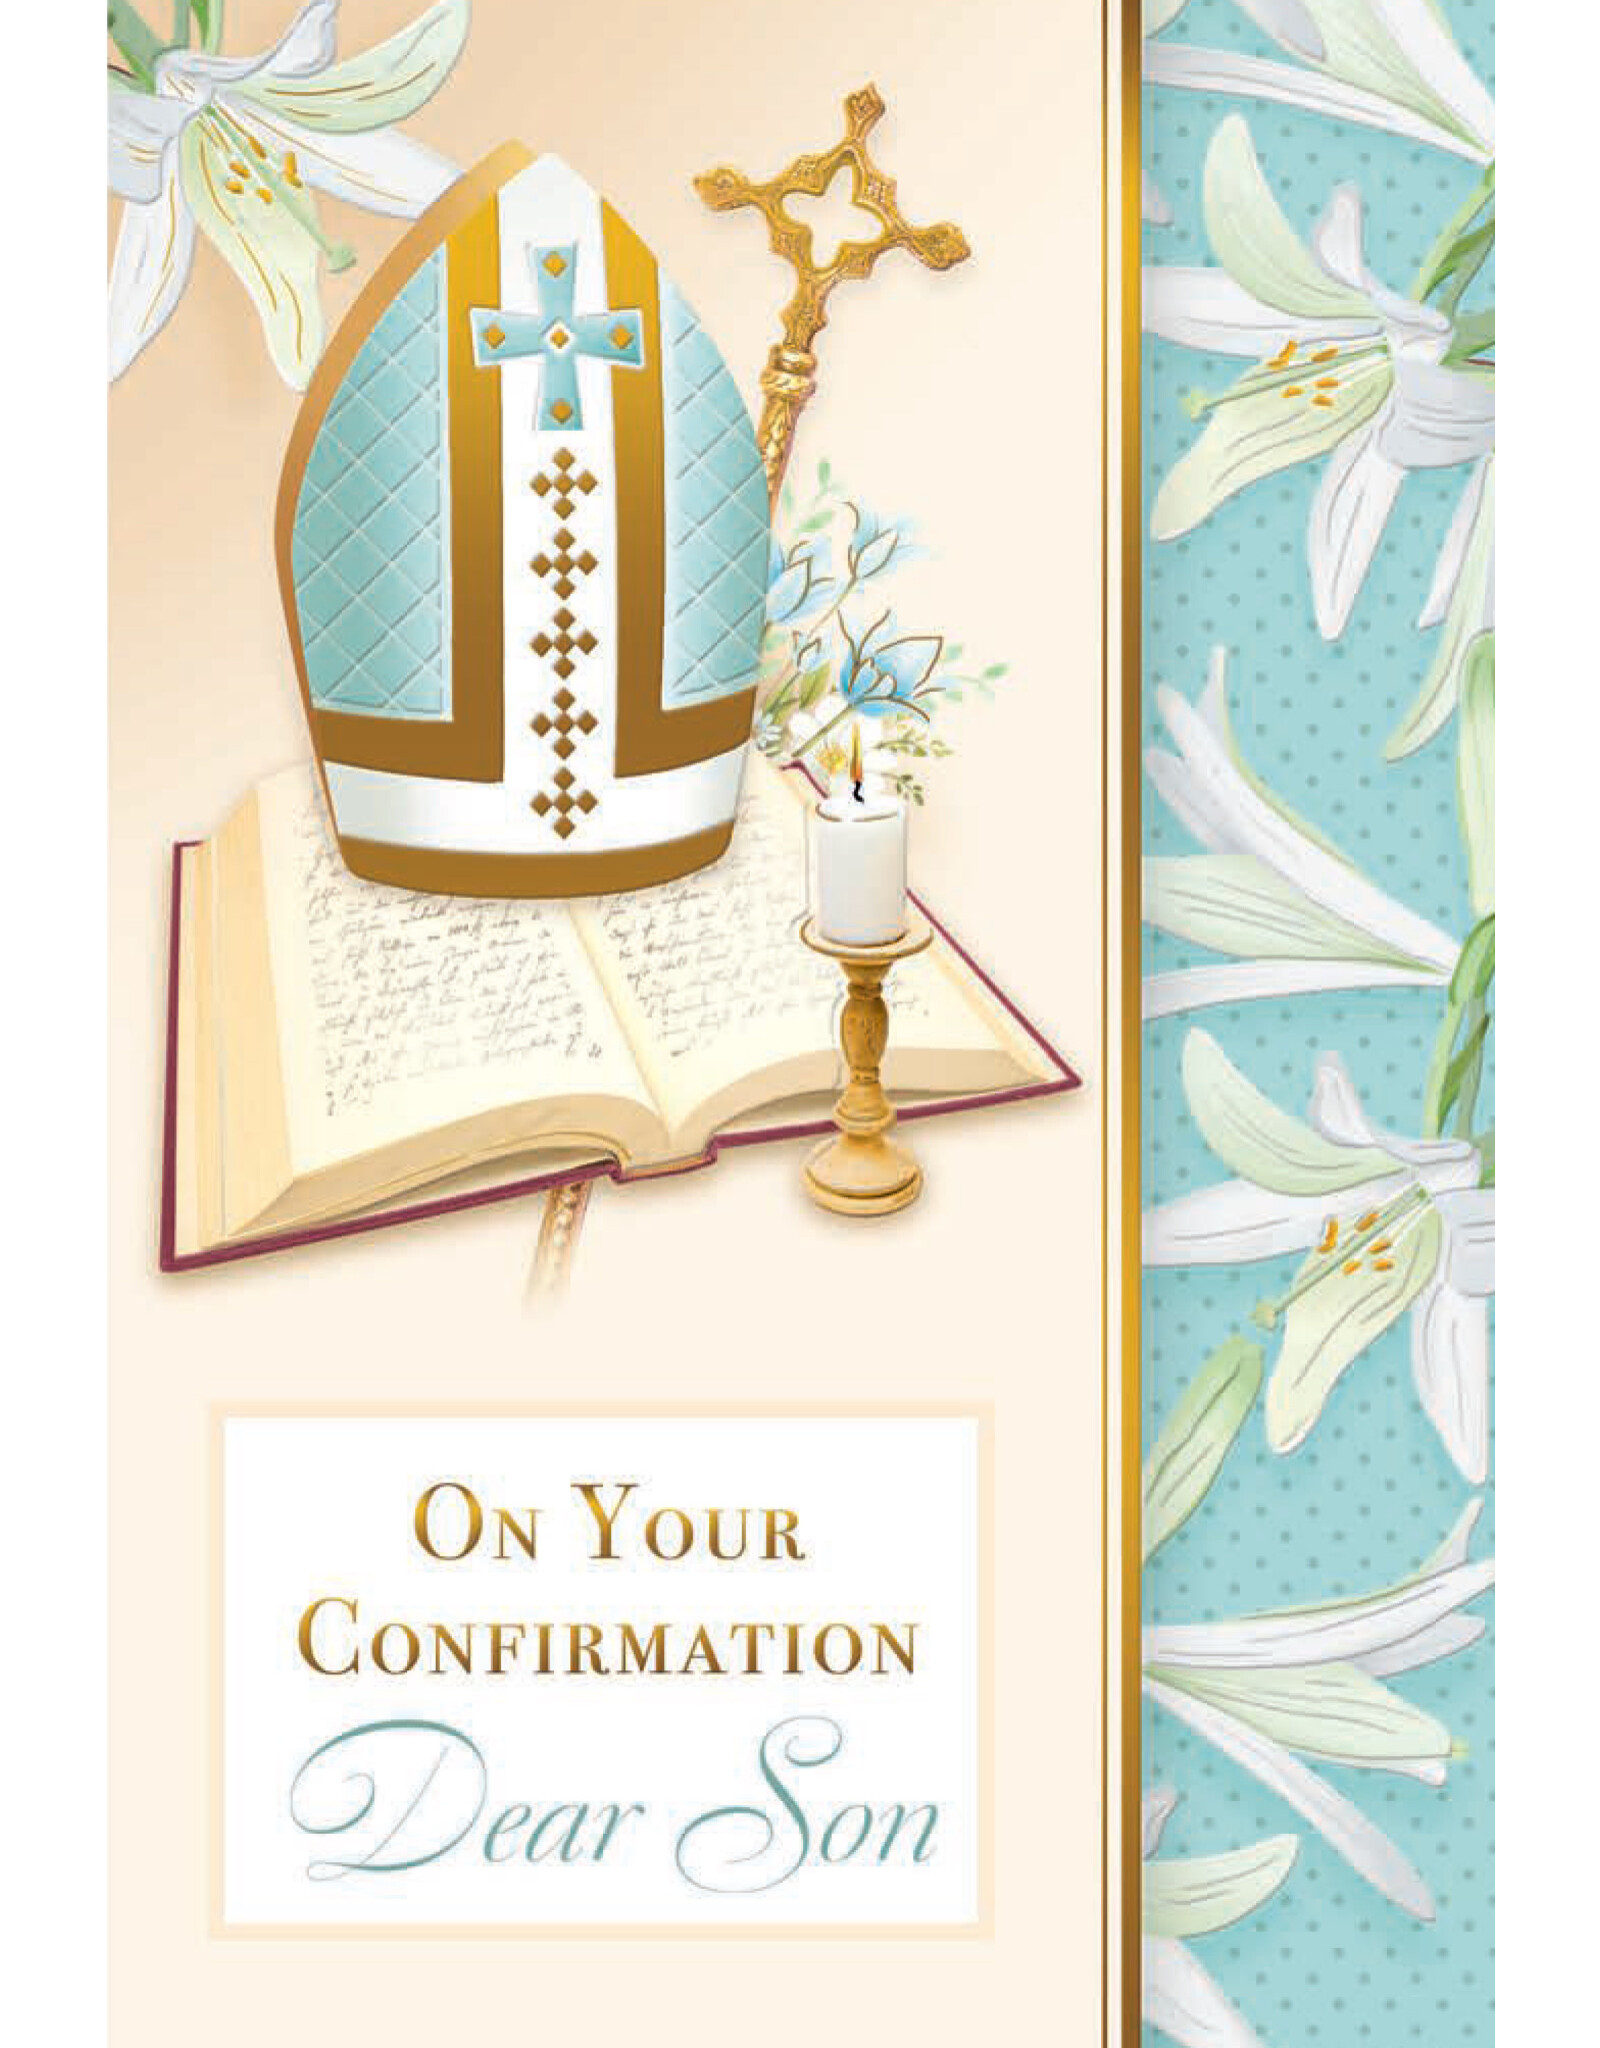 Greetings of Faith Card - Confirmation (Son), Teal with Lillies